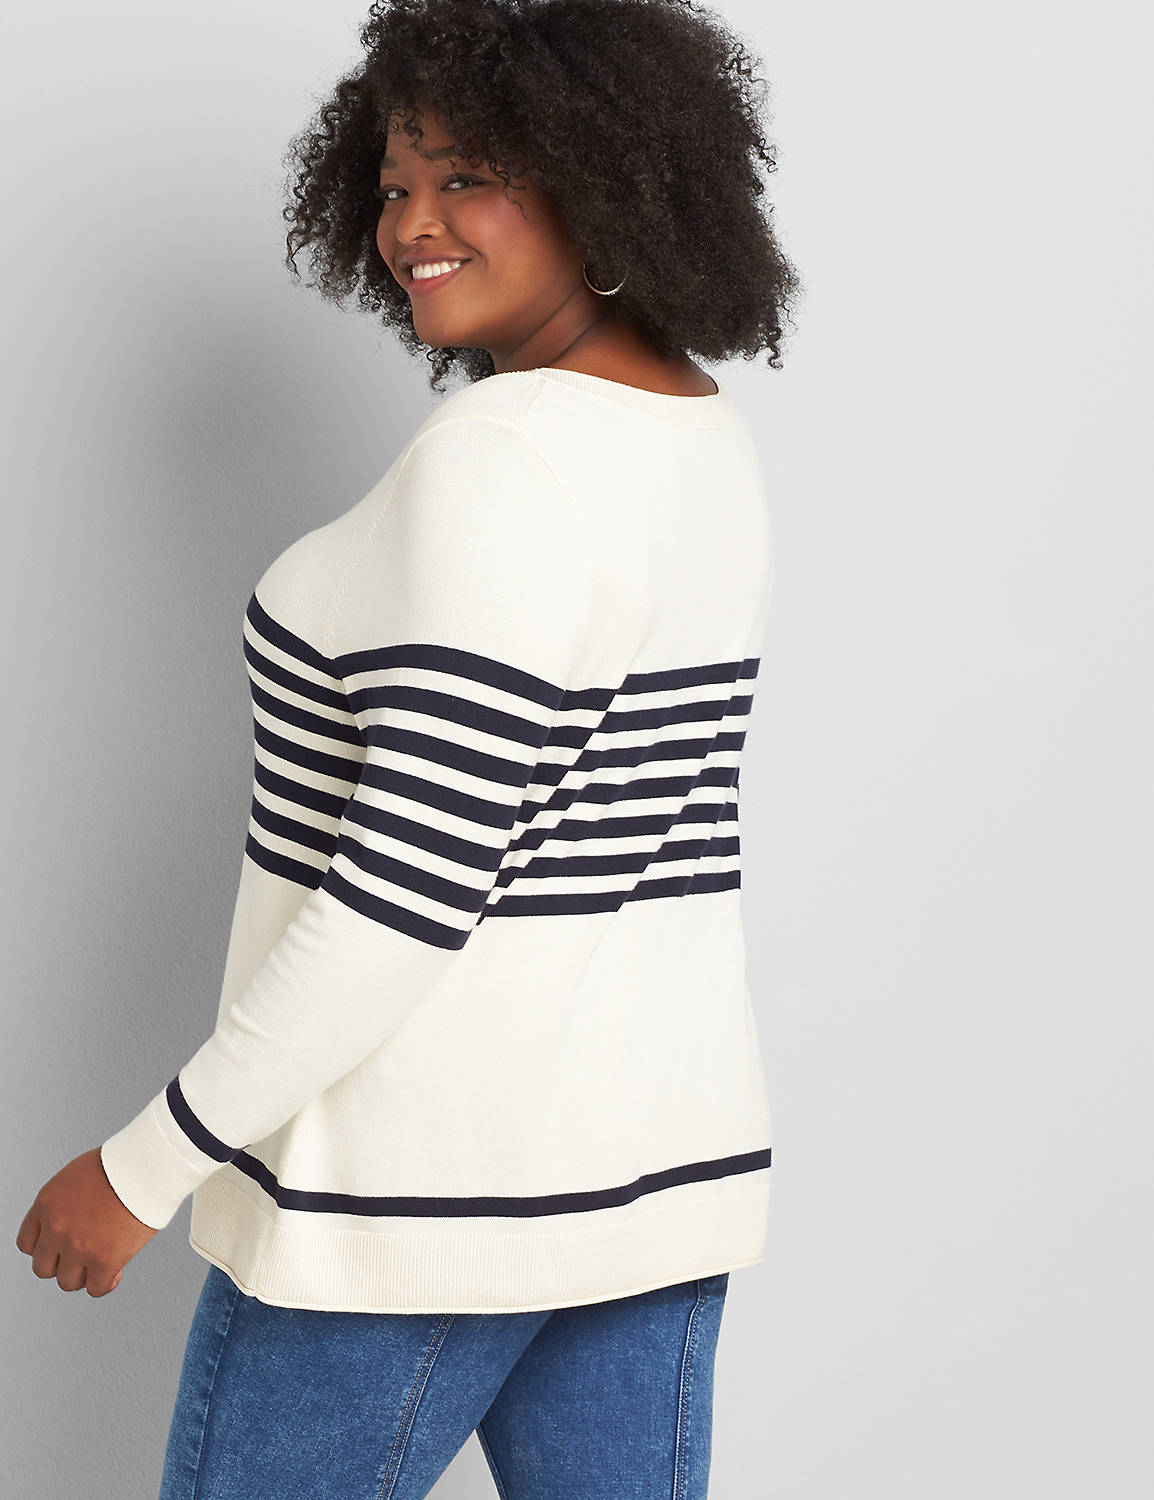 Long Sleeve Open Crew Neck Sweater with Stripes 1117590:PANTONE Pristine:10/12 Product Image 2